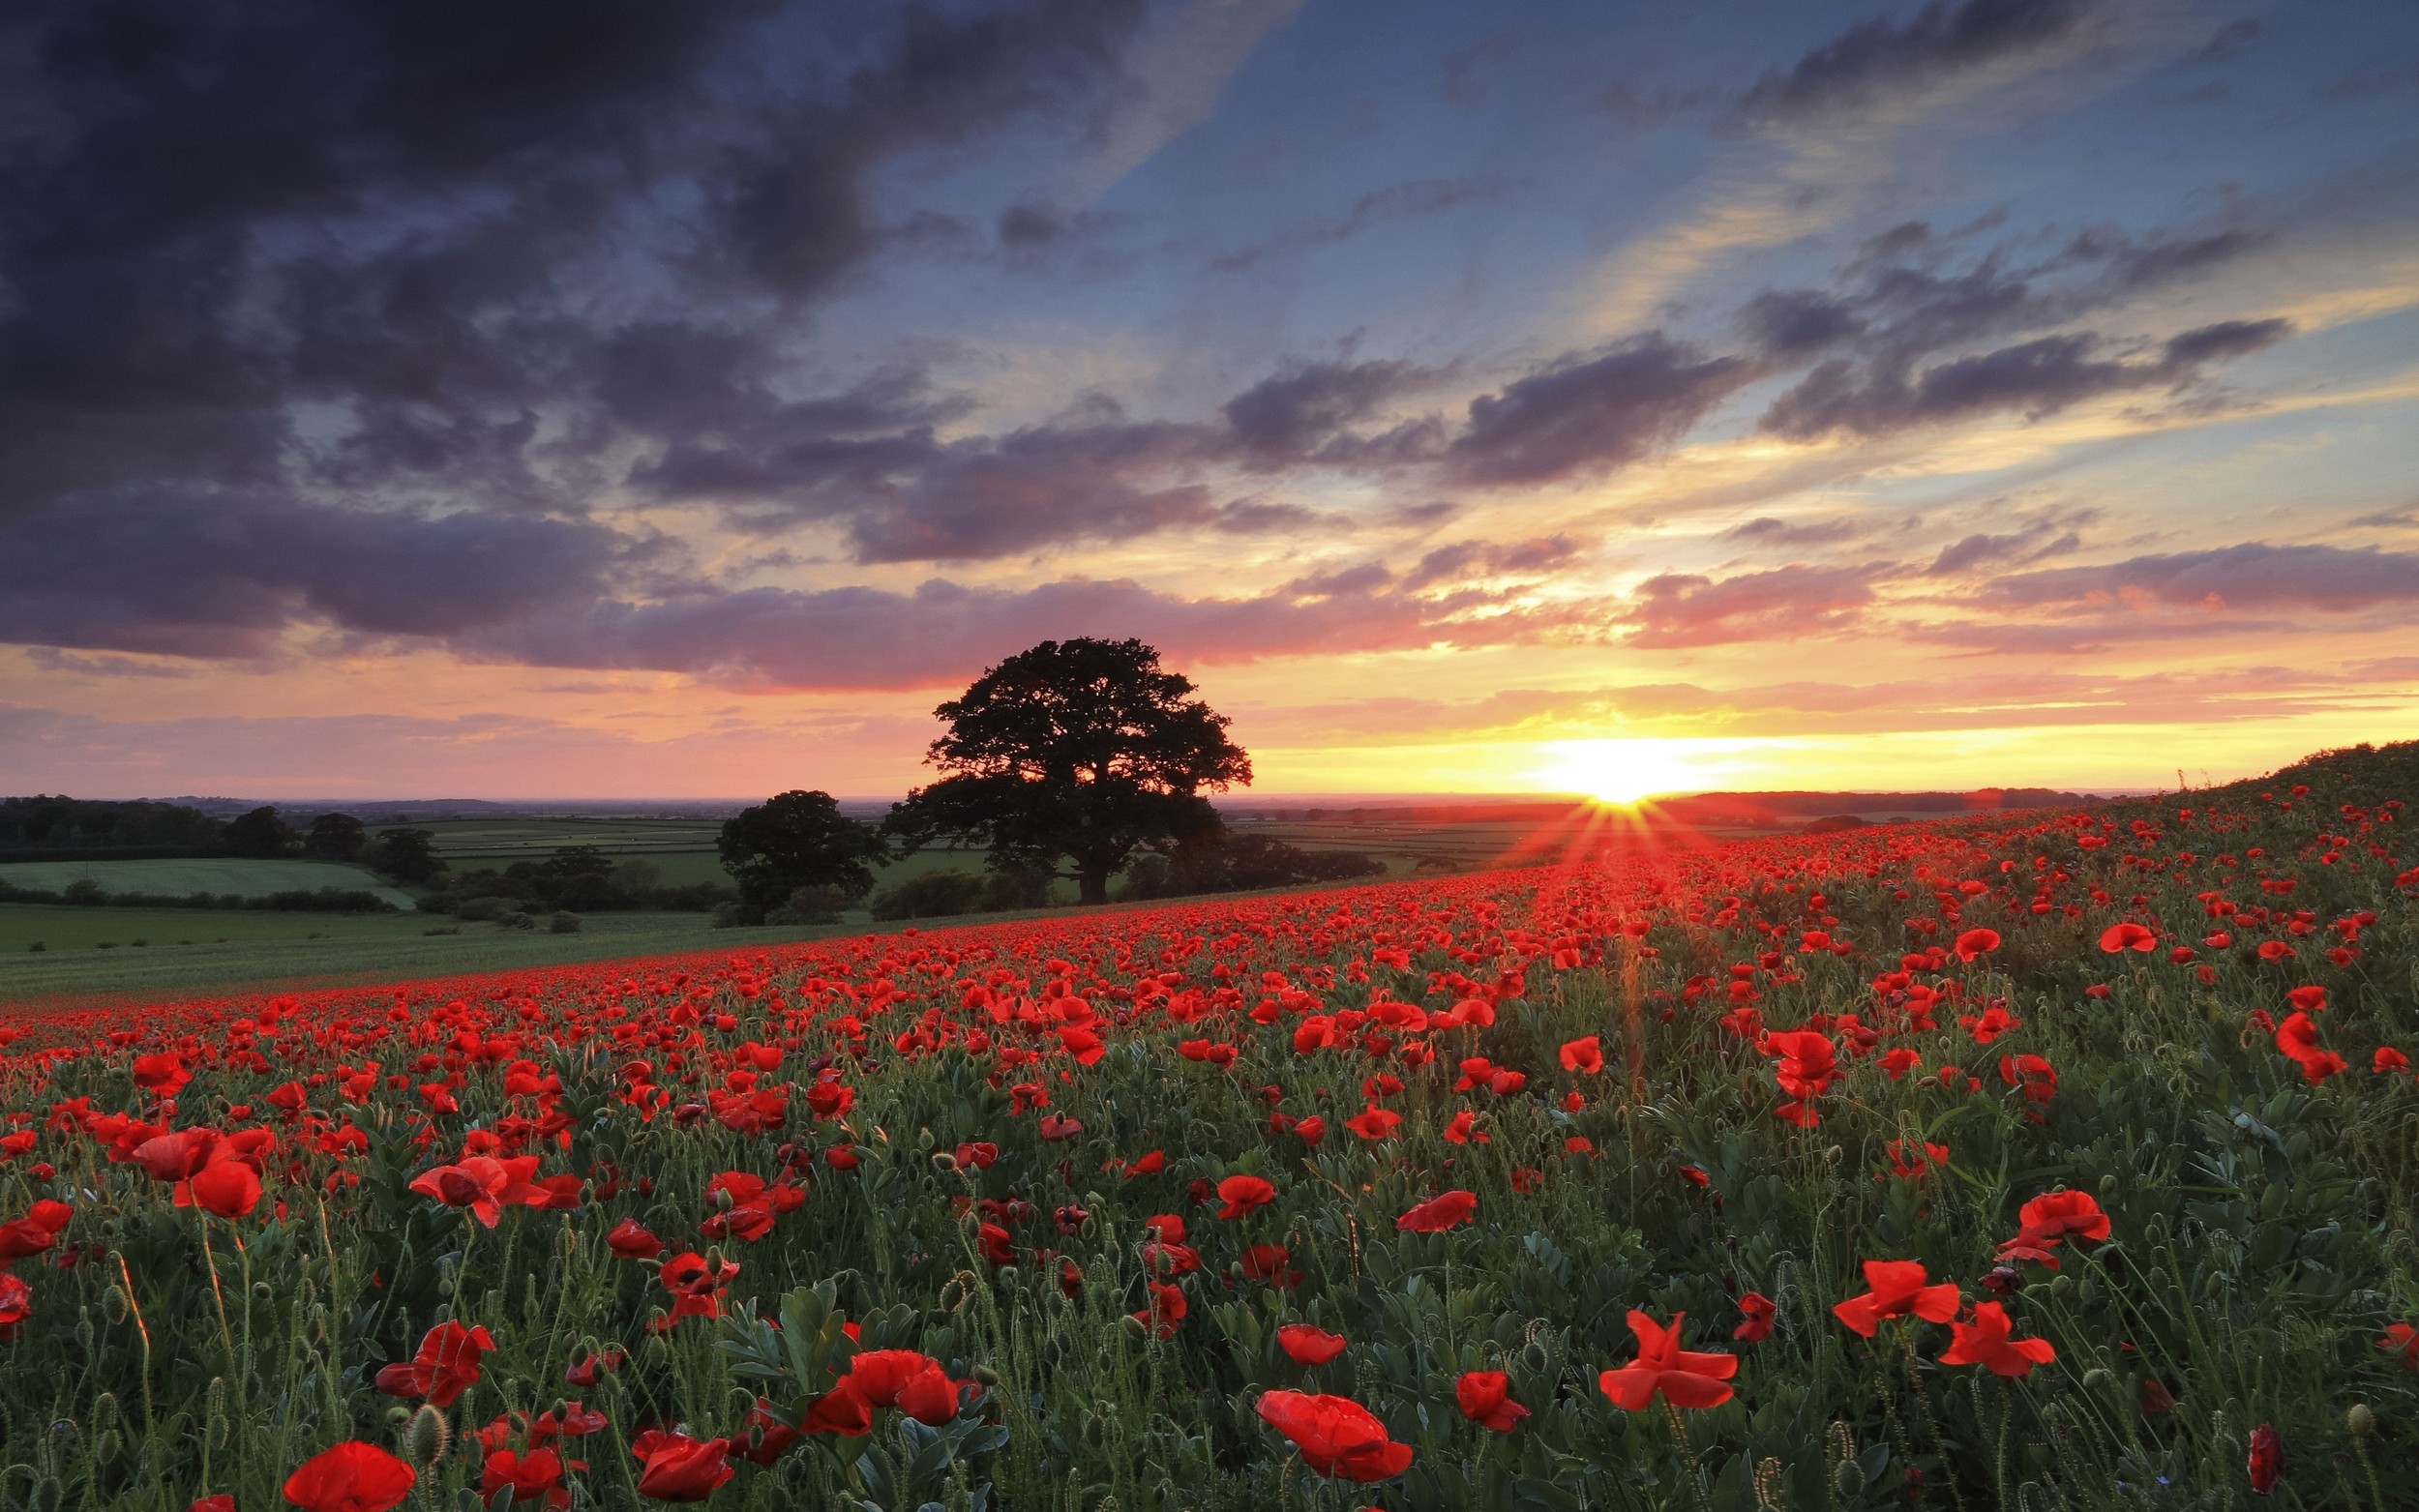 General 2500x1563 nature landscape photography flowers poppies sunset spring field trees red green sky plants sunlight